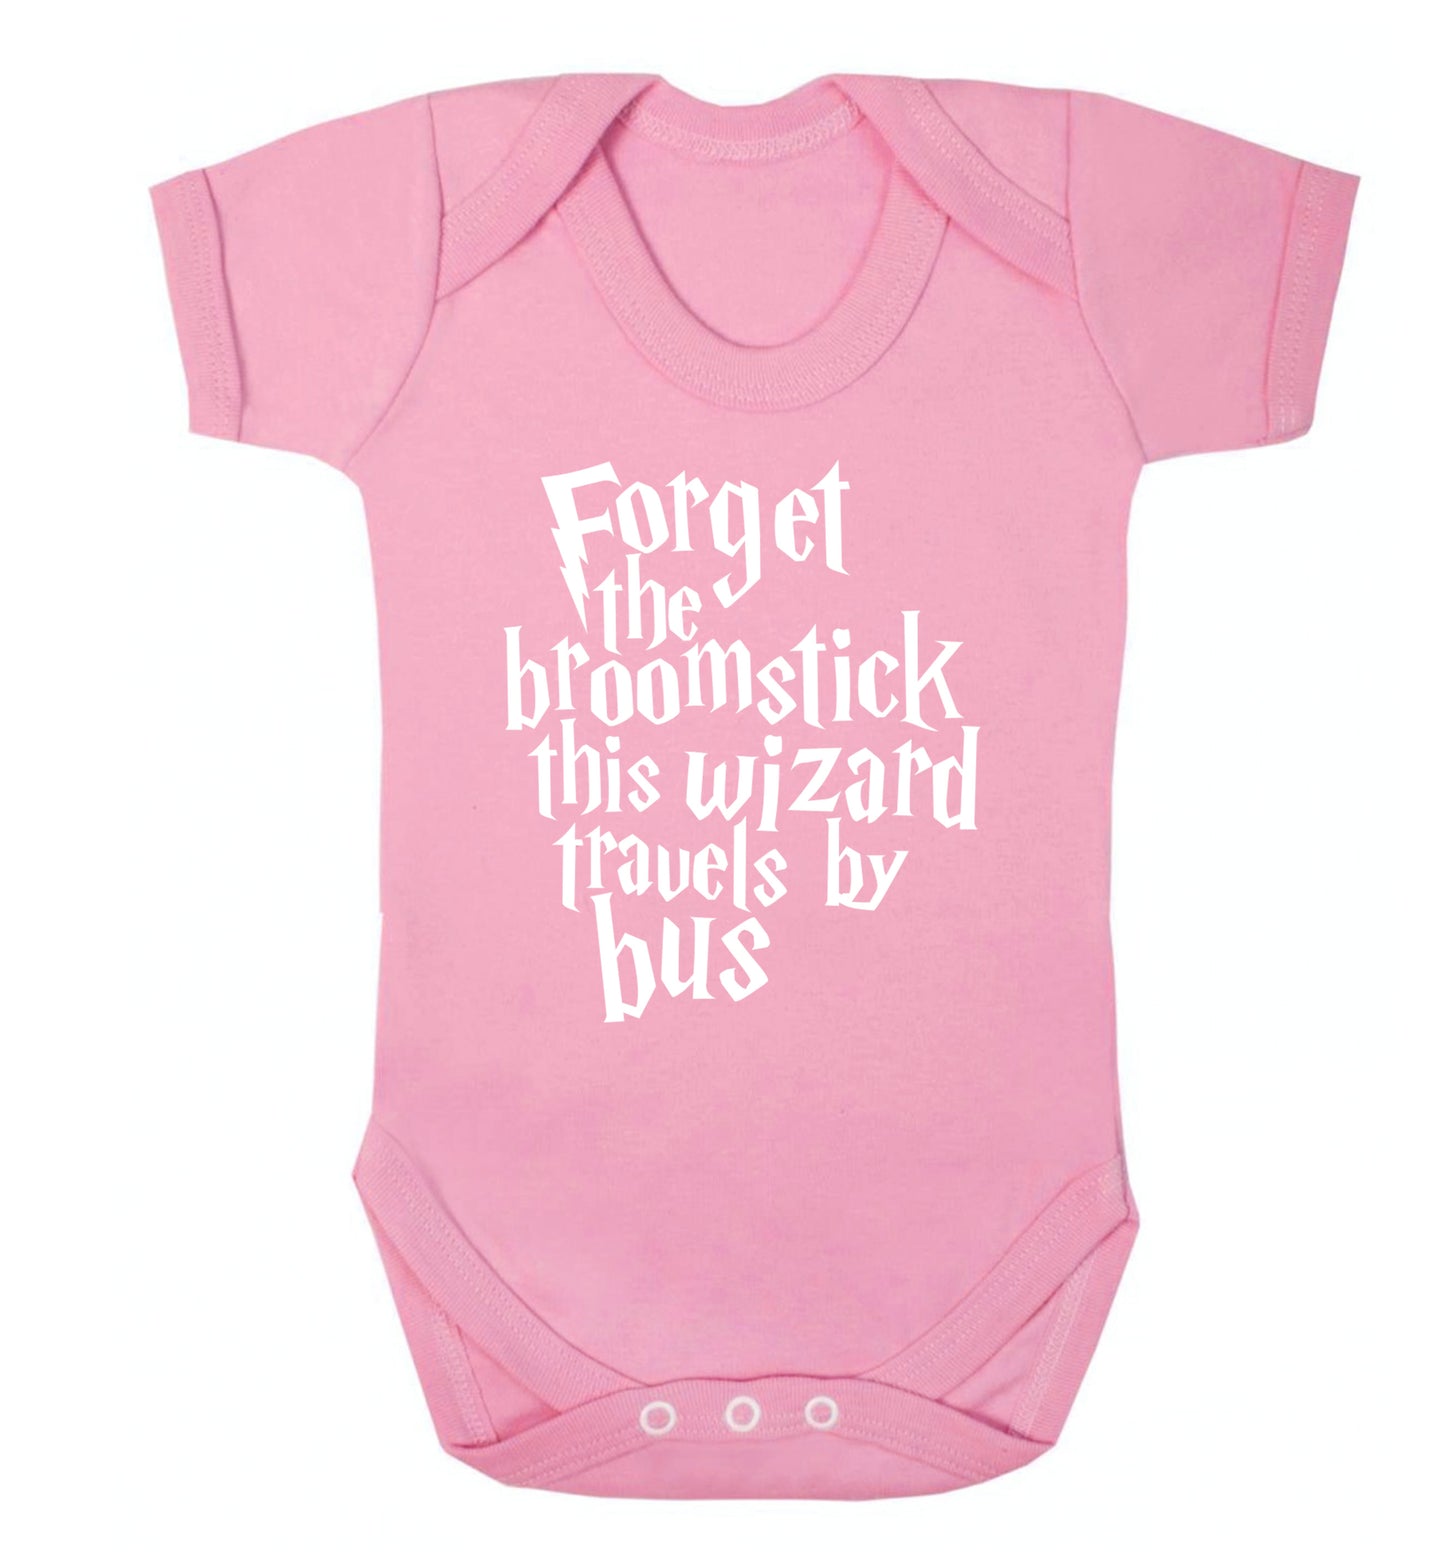 Forget the broomstick this wizard travels by bus Baby Vest pale pink 18-24 months